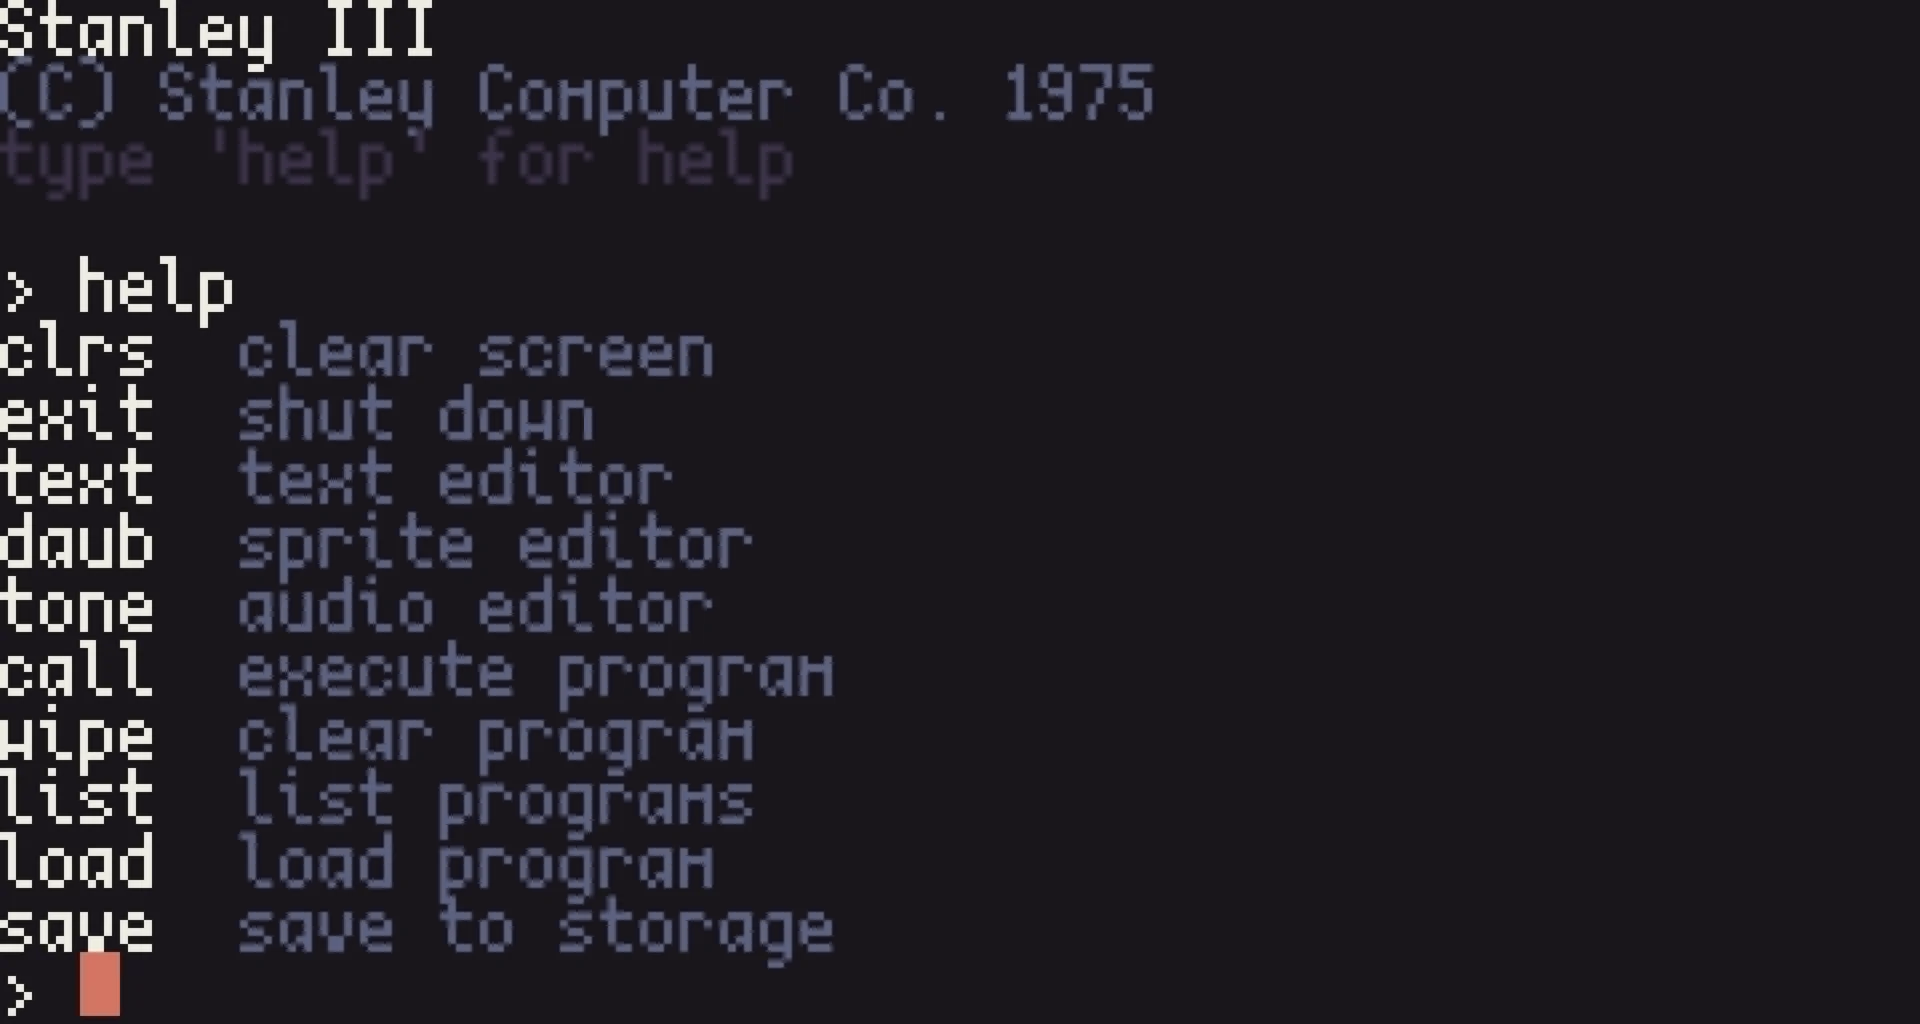 A screenshot of the Stanley's interactive terminal, displaying the output of the 'help' command, which lists installed programs and available commands.